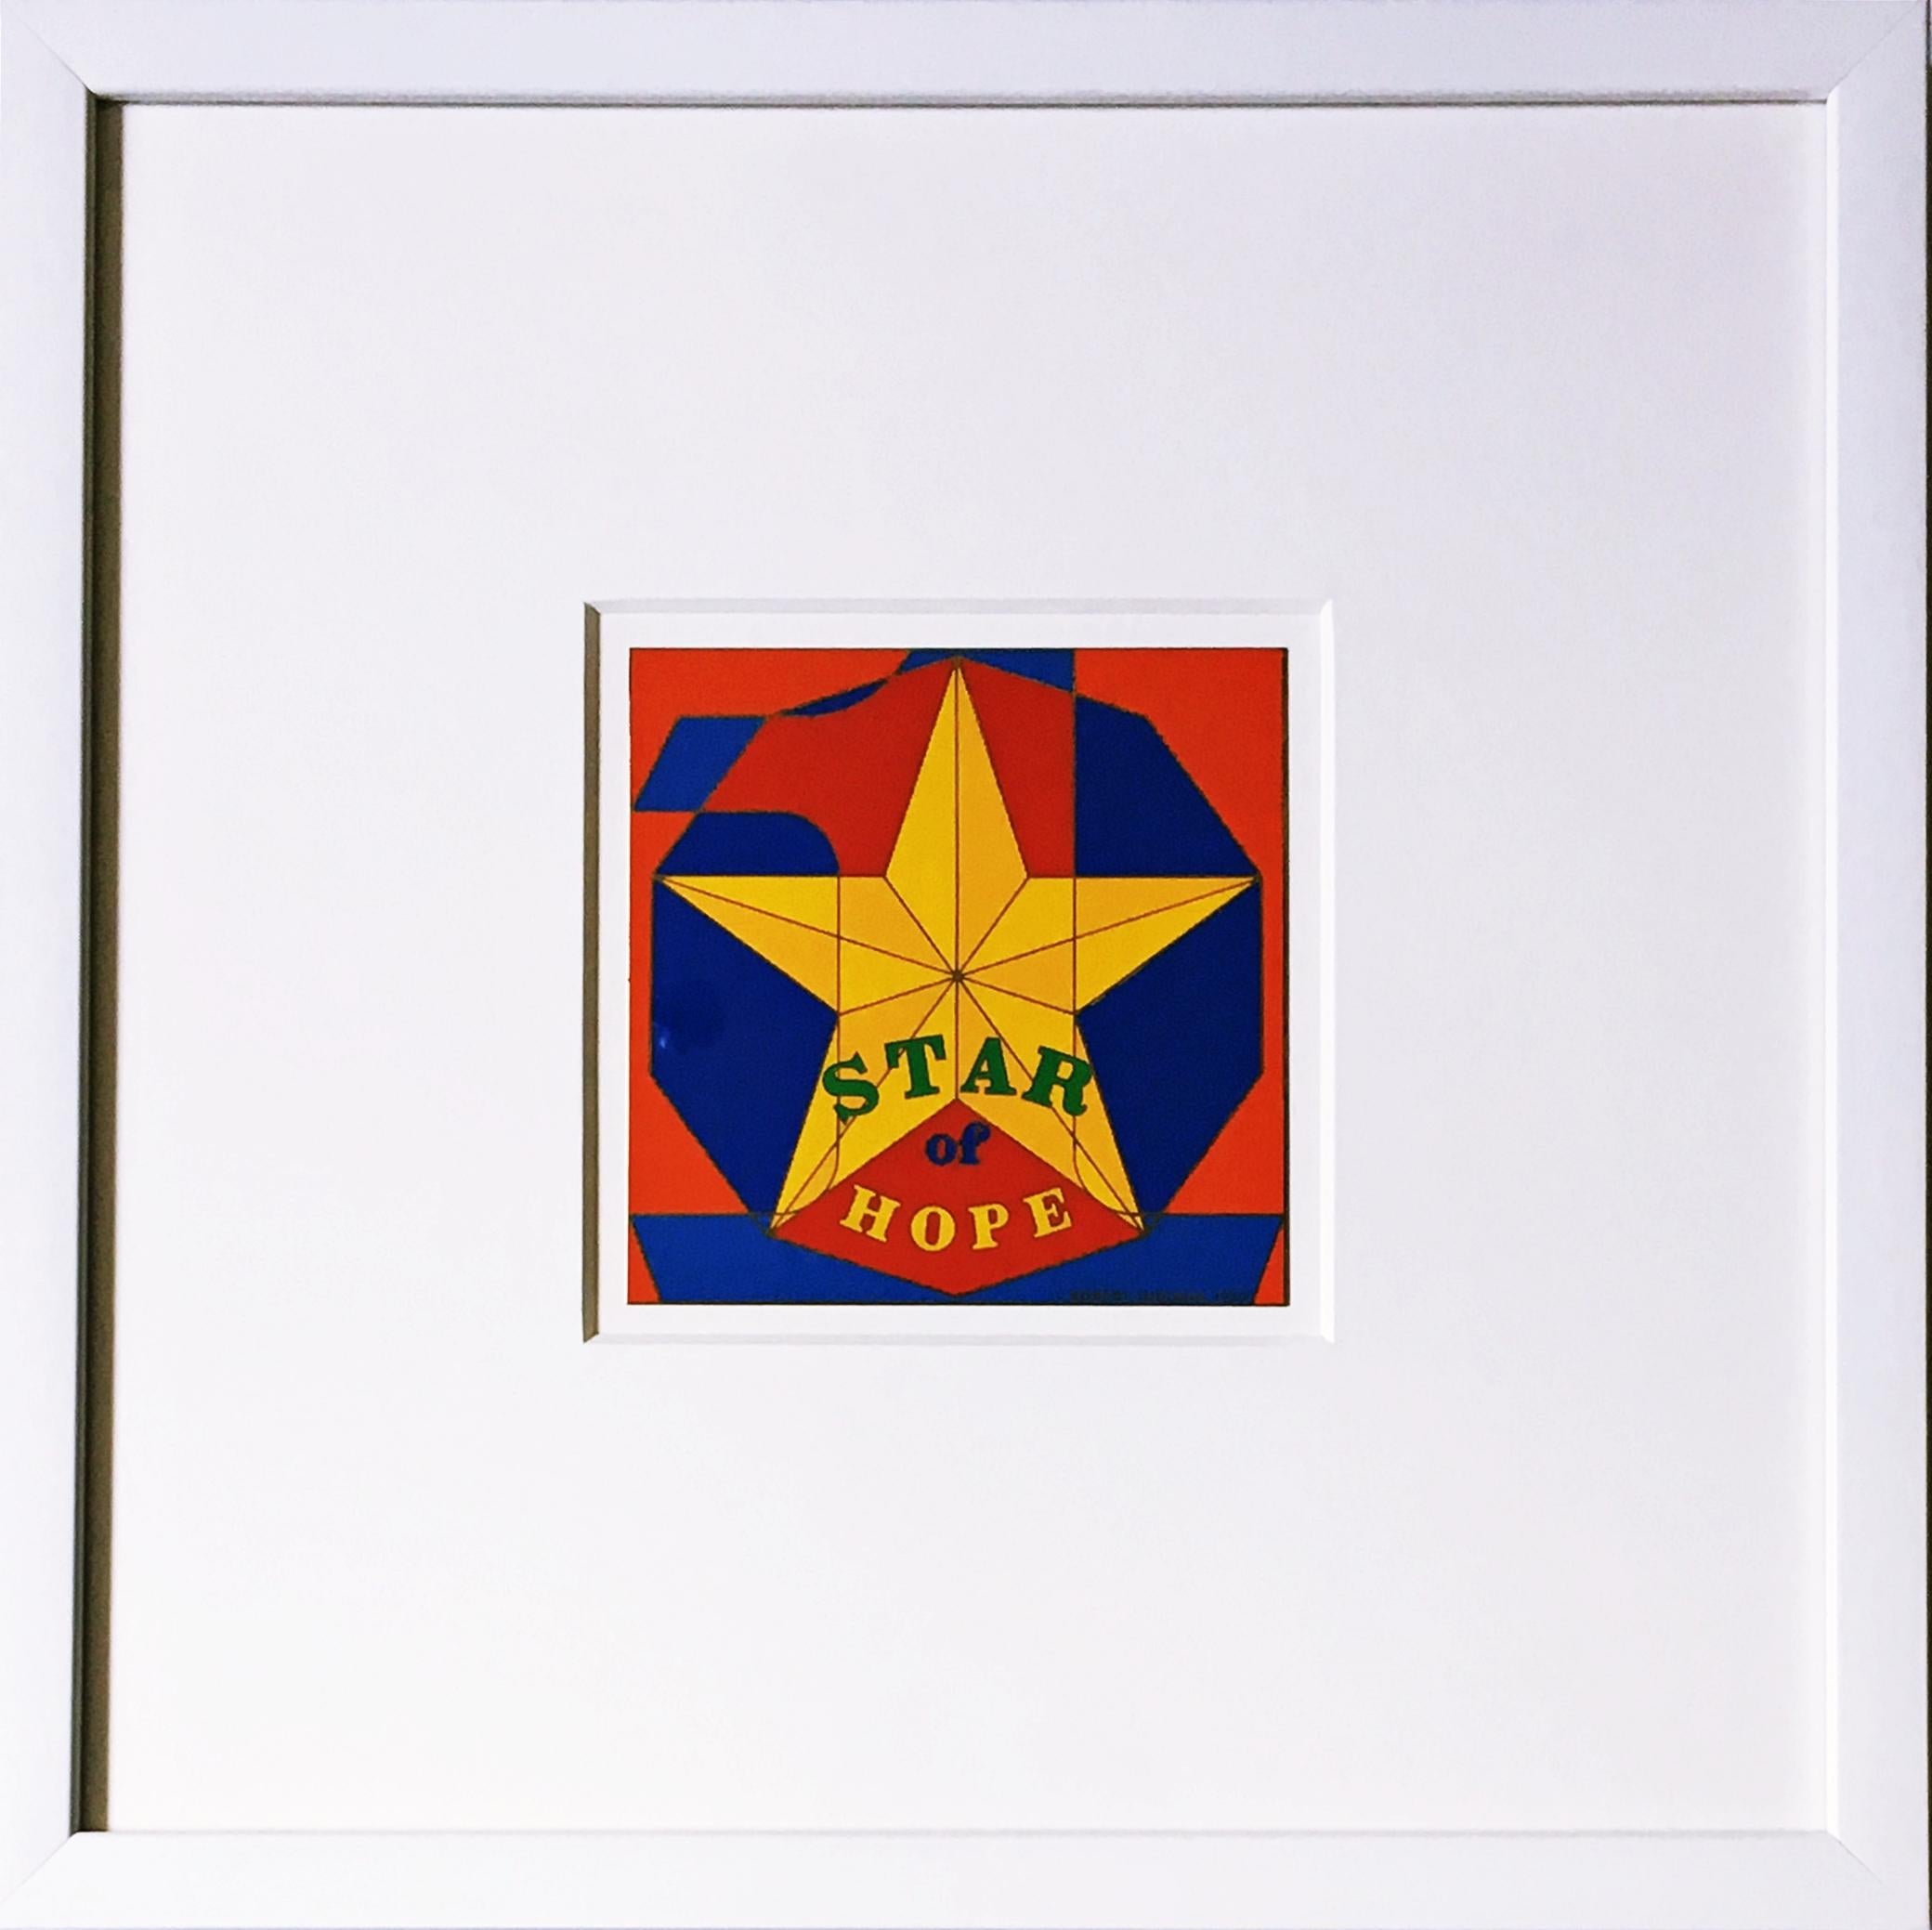 Star of Hope, enamel on metal plaque with stamped name and copyright, Framed - Pop Art Mixed Media Art by Robert Indiana